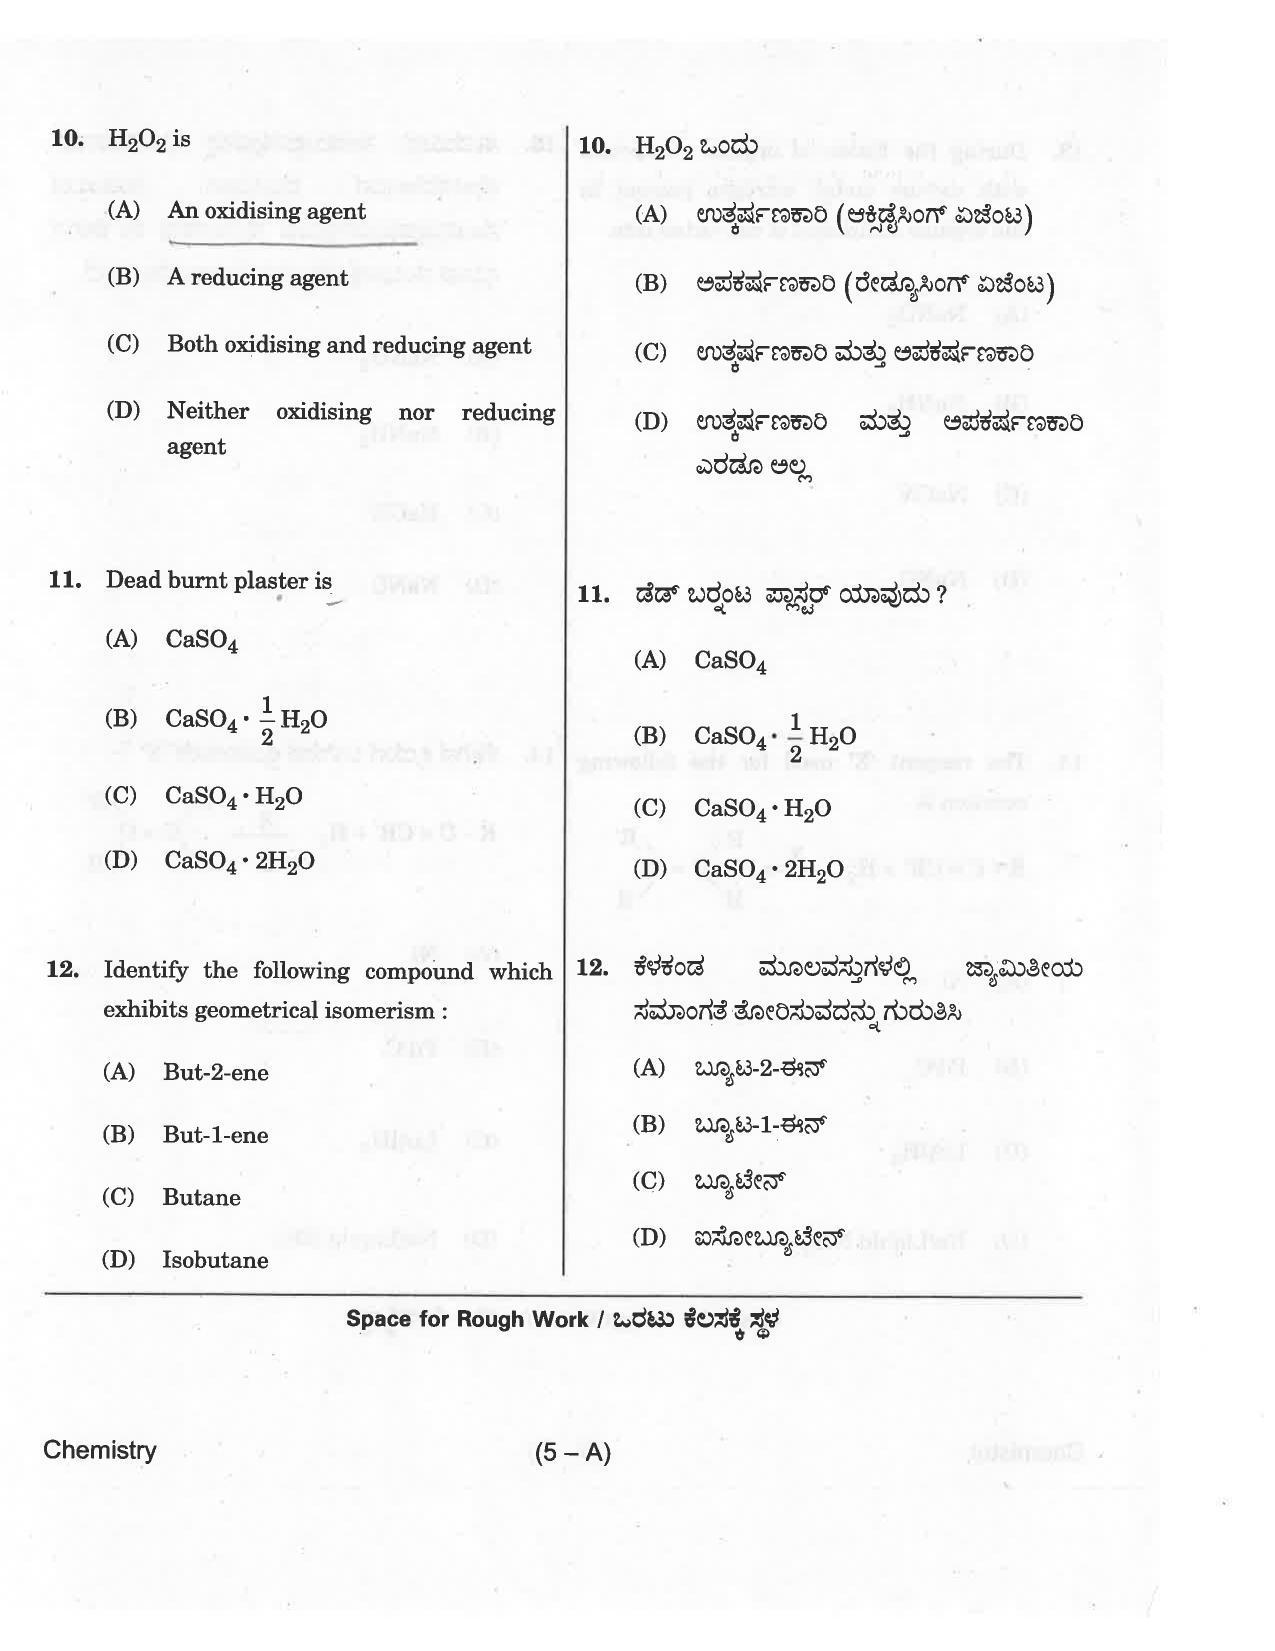 KCET Chemistry 2018 Question Papers - Page 5